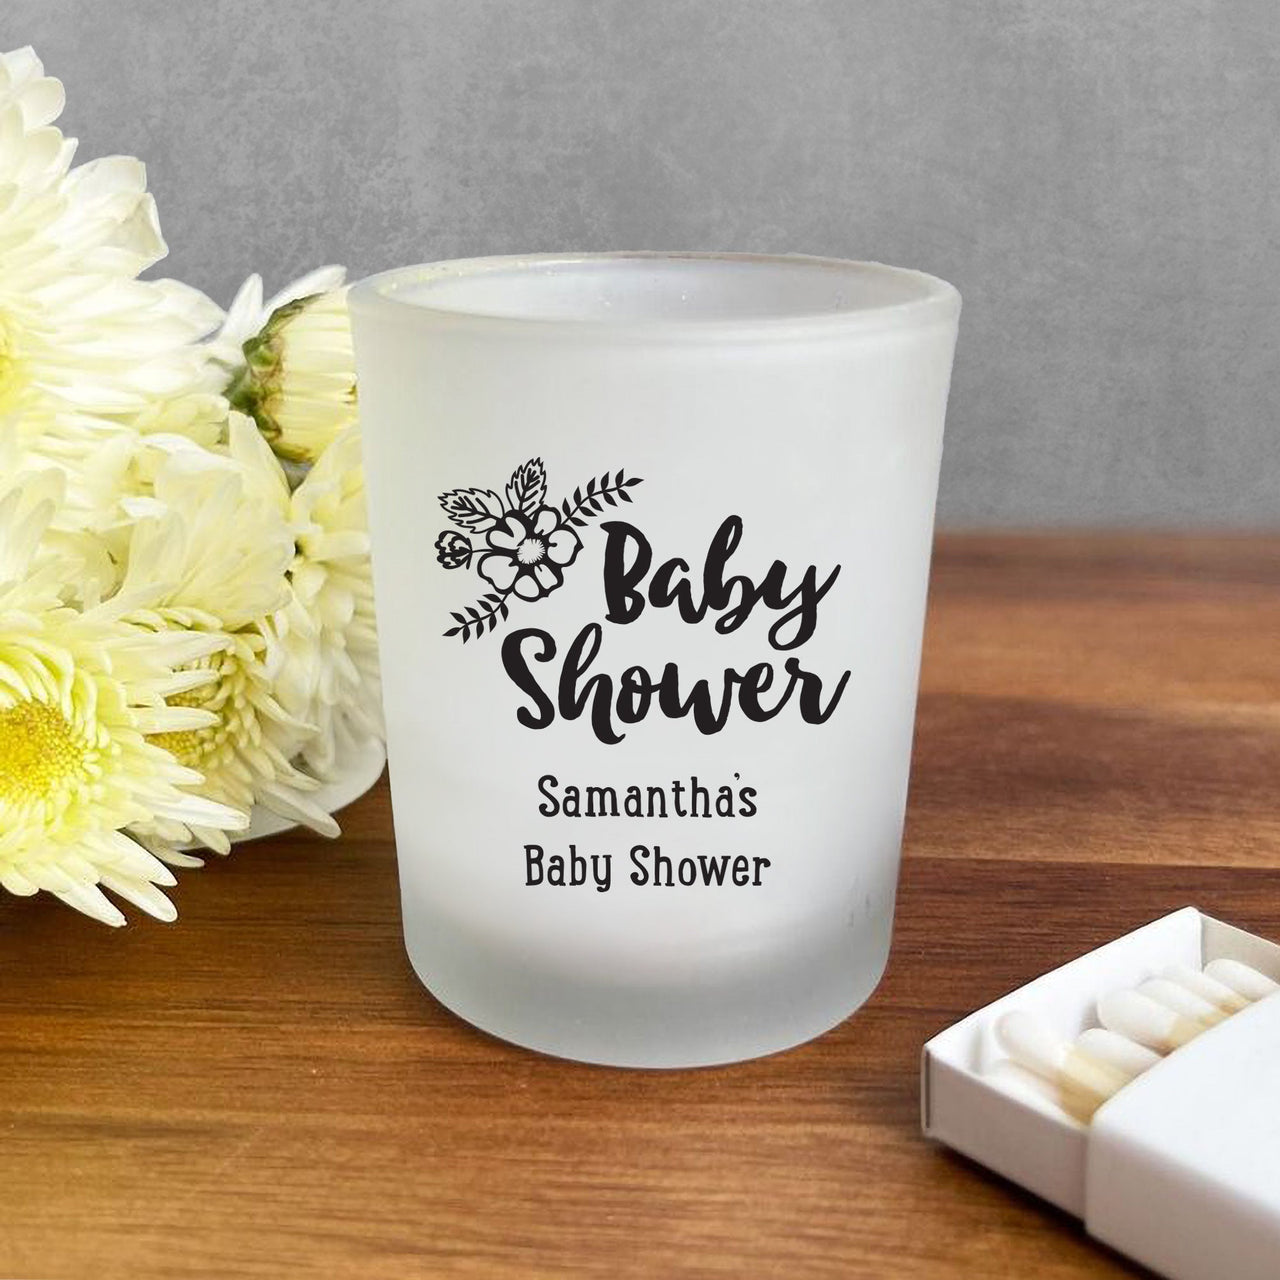 Personalized Filled Candle  Frosted Glass Votive Holder